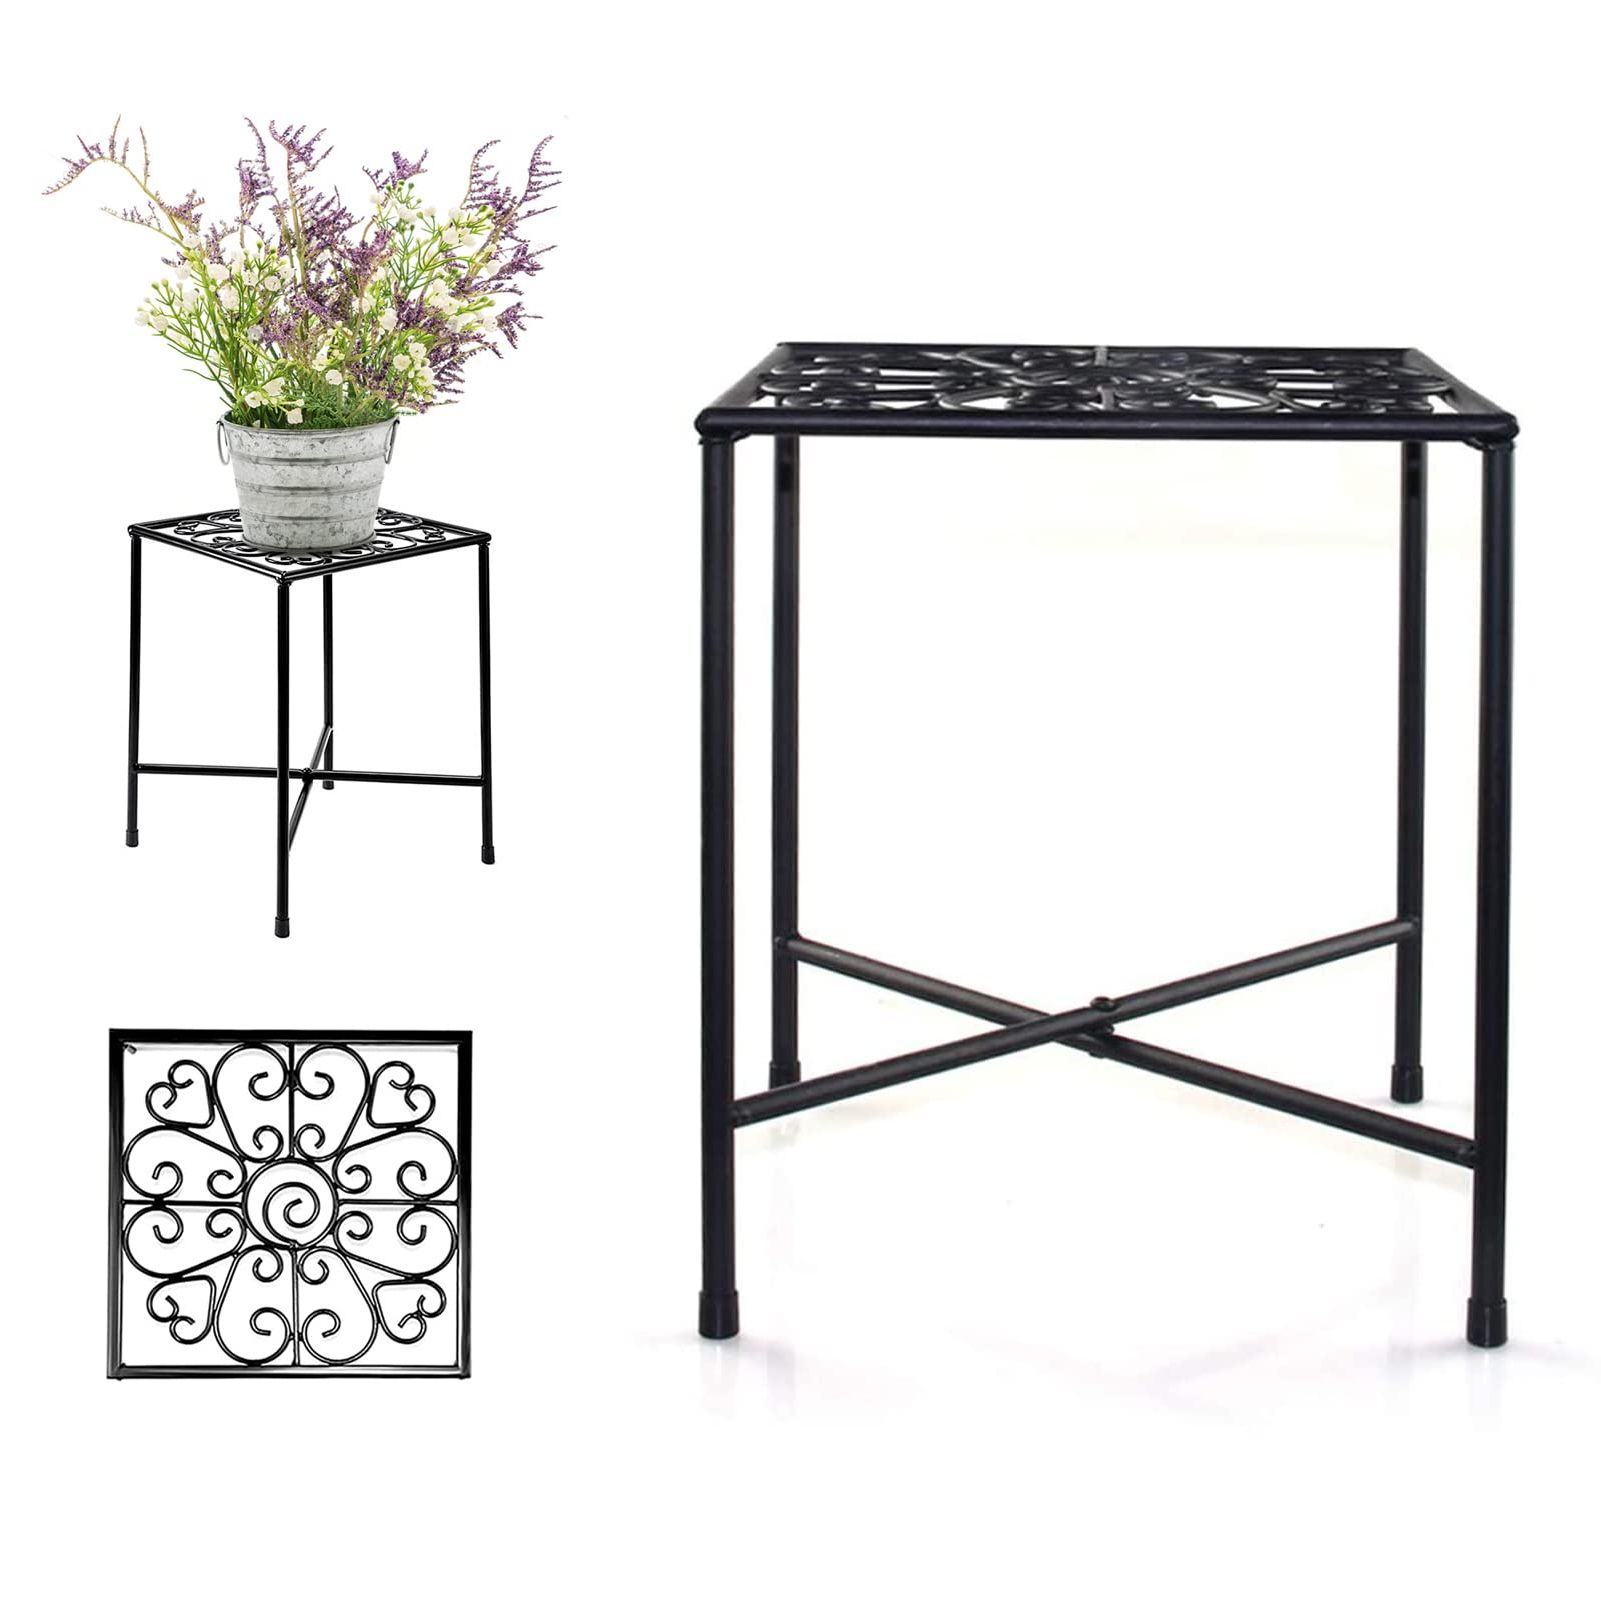 1pcs Metal Plant Stand, Elegantly Designed Art Iron Flower Stand For Decor  Plant Corner, Durable Rust Resistant Black Modern Plant Stand For Home  Garden Display Greenery – Easy Assembly For Most Up To Date Iron Square Plant Stands (View 11 of 15)